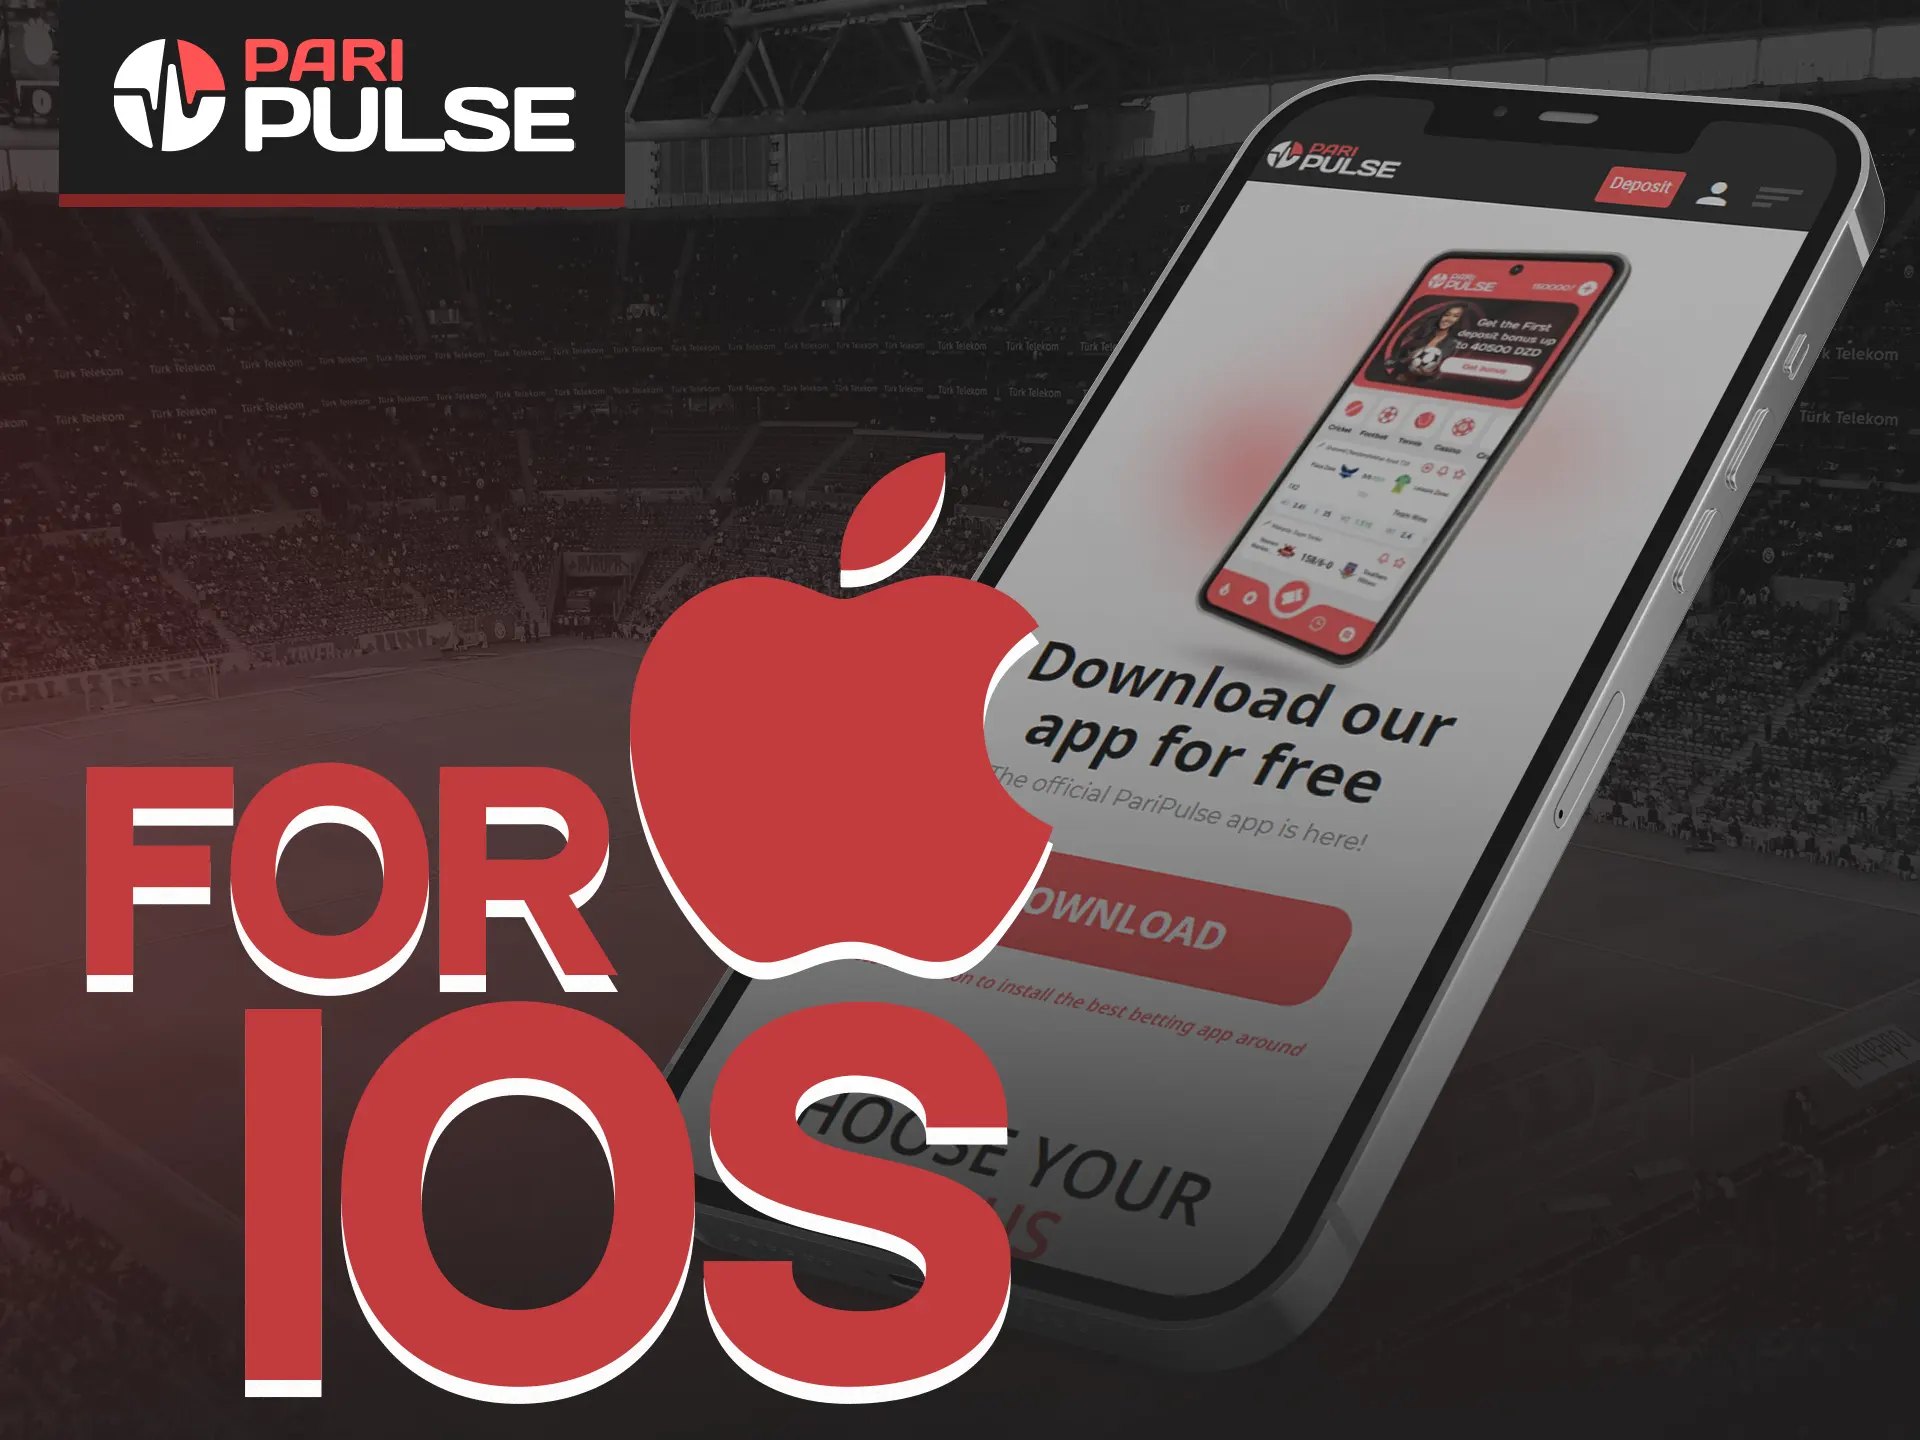 Play and win with the PariPulse iOS app.